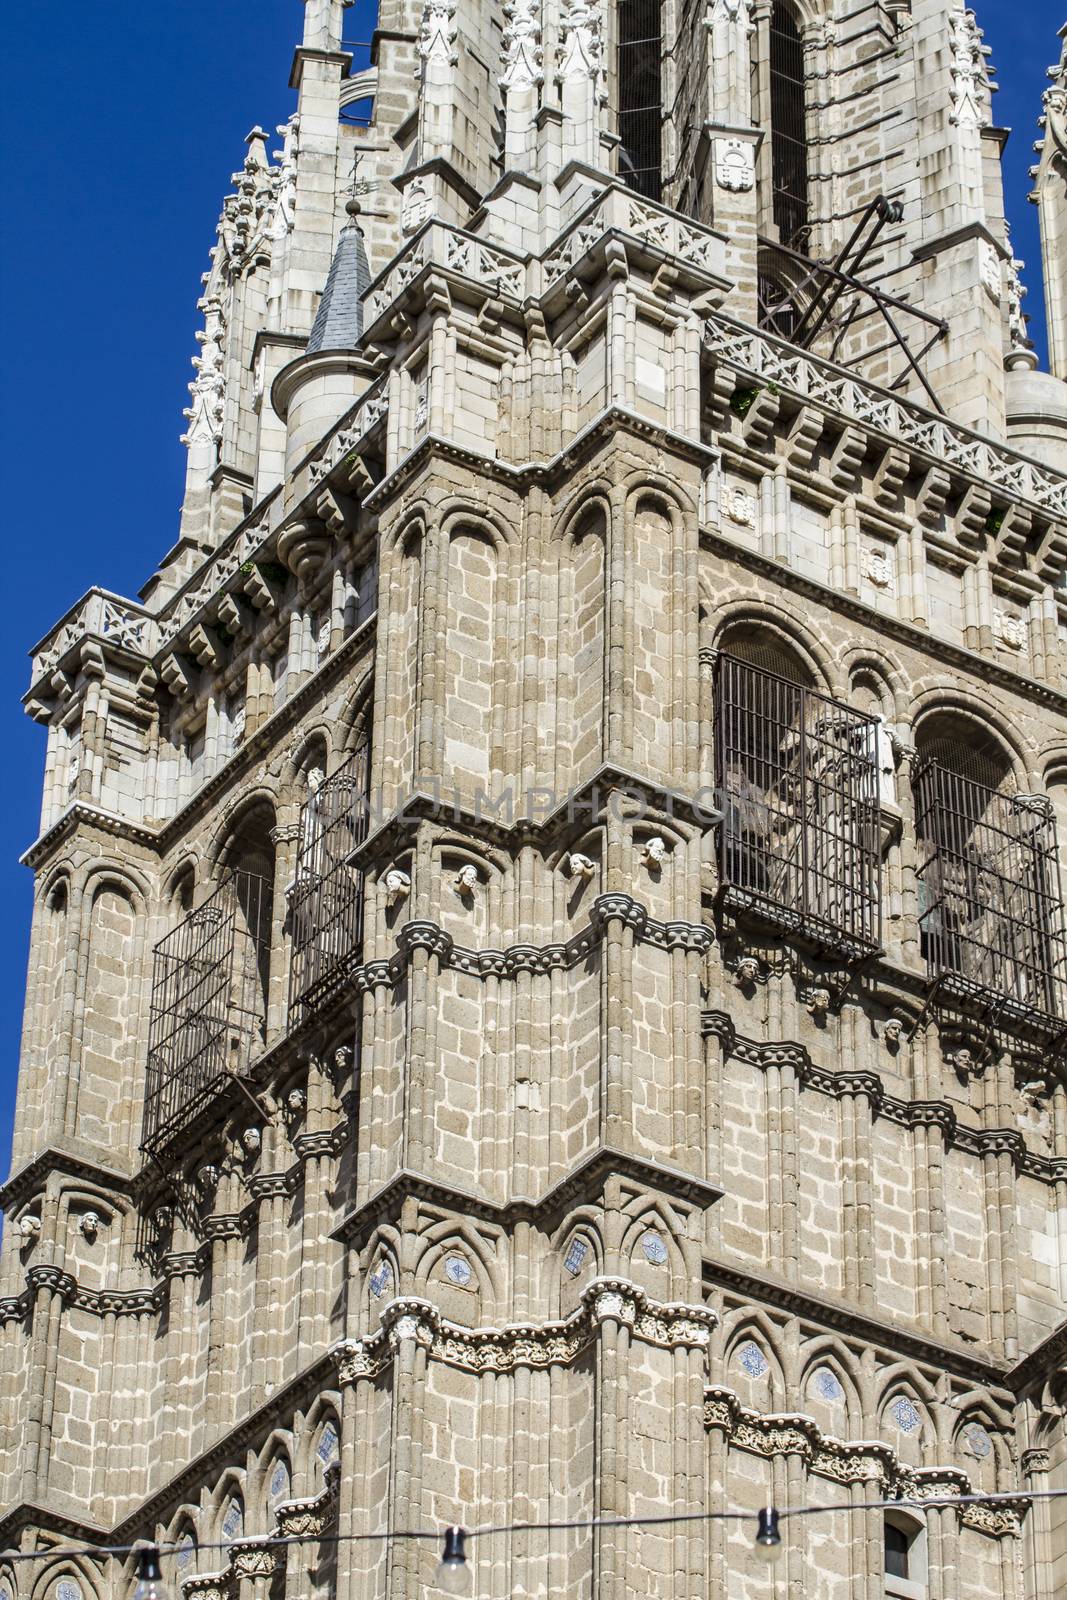 Tower toledo cathedral, spain by FernandoCortes